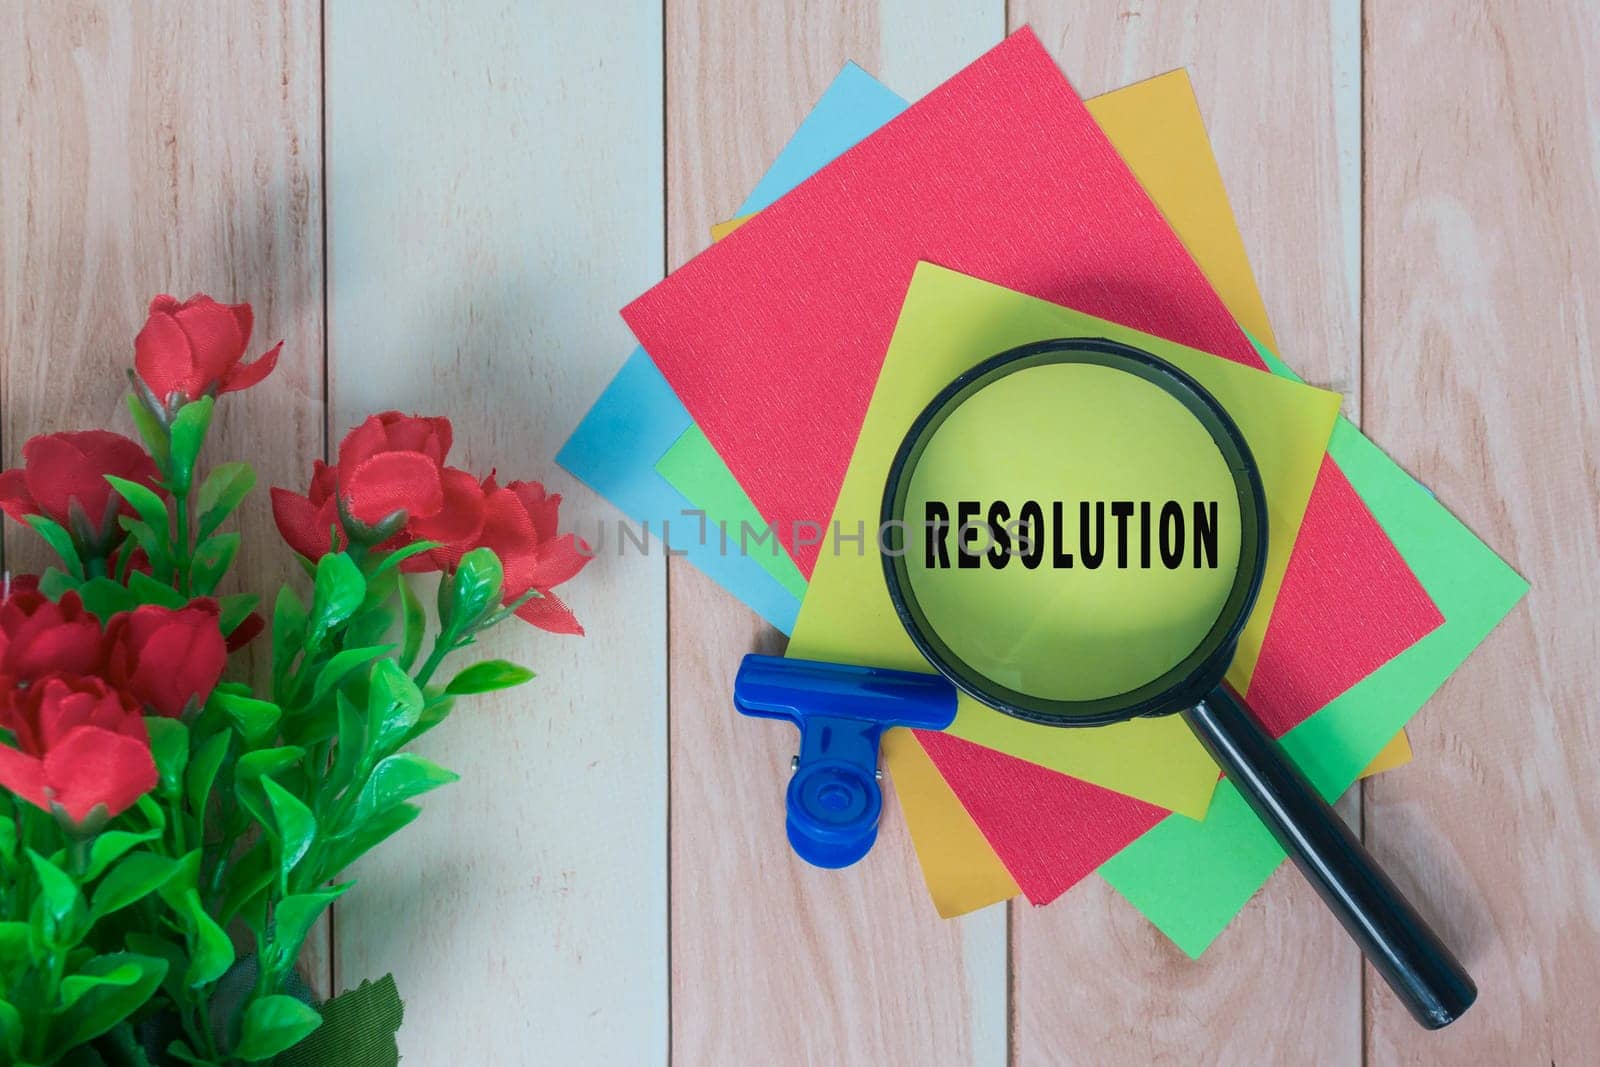 Resolution word on colorful adhesive paper with magnifying glass and artificial flowers on wooden desk.